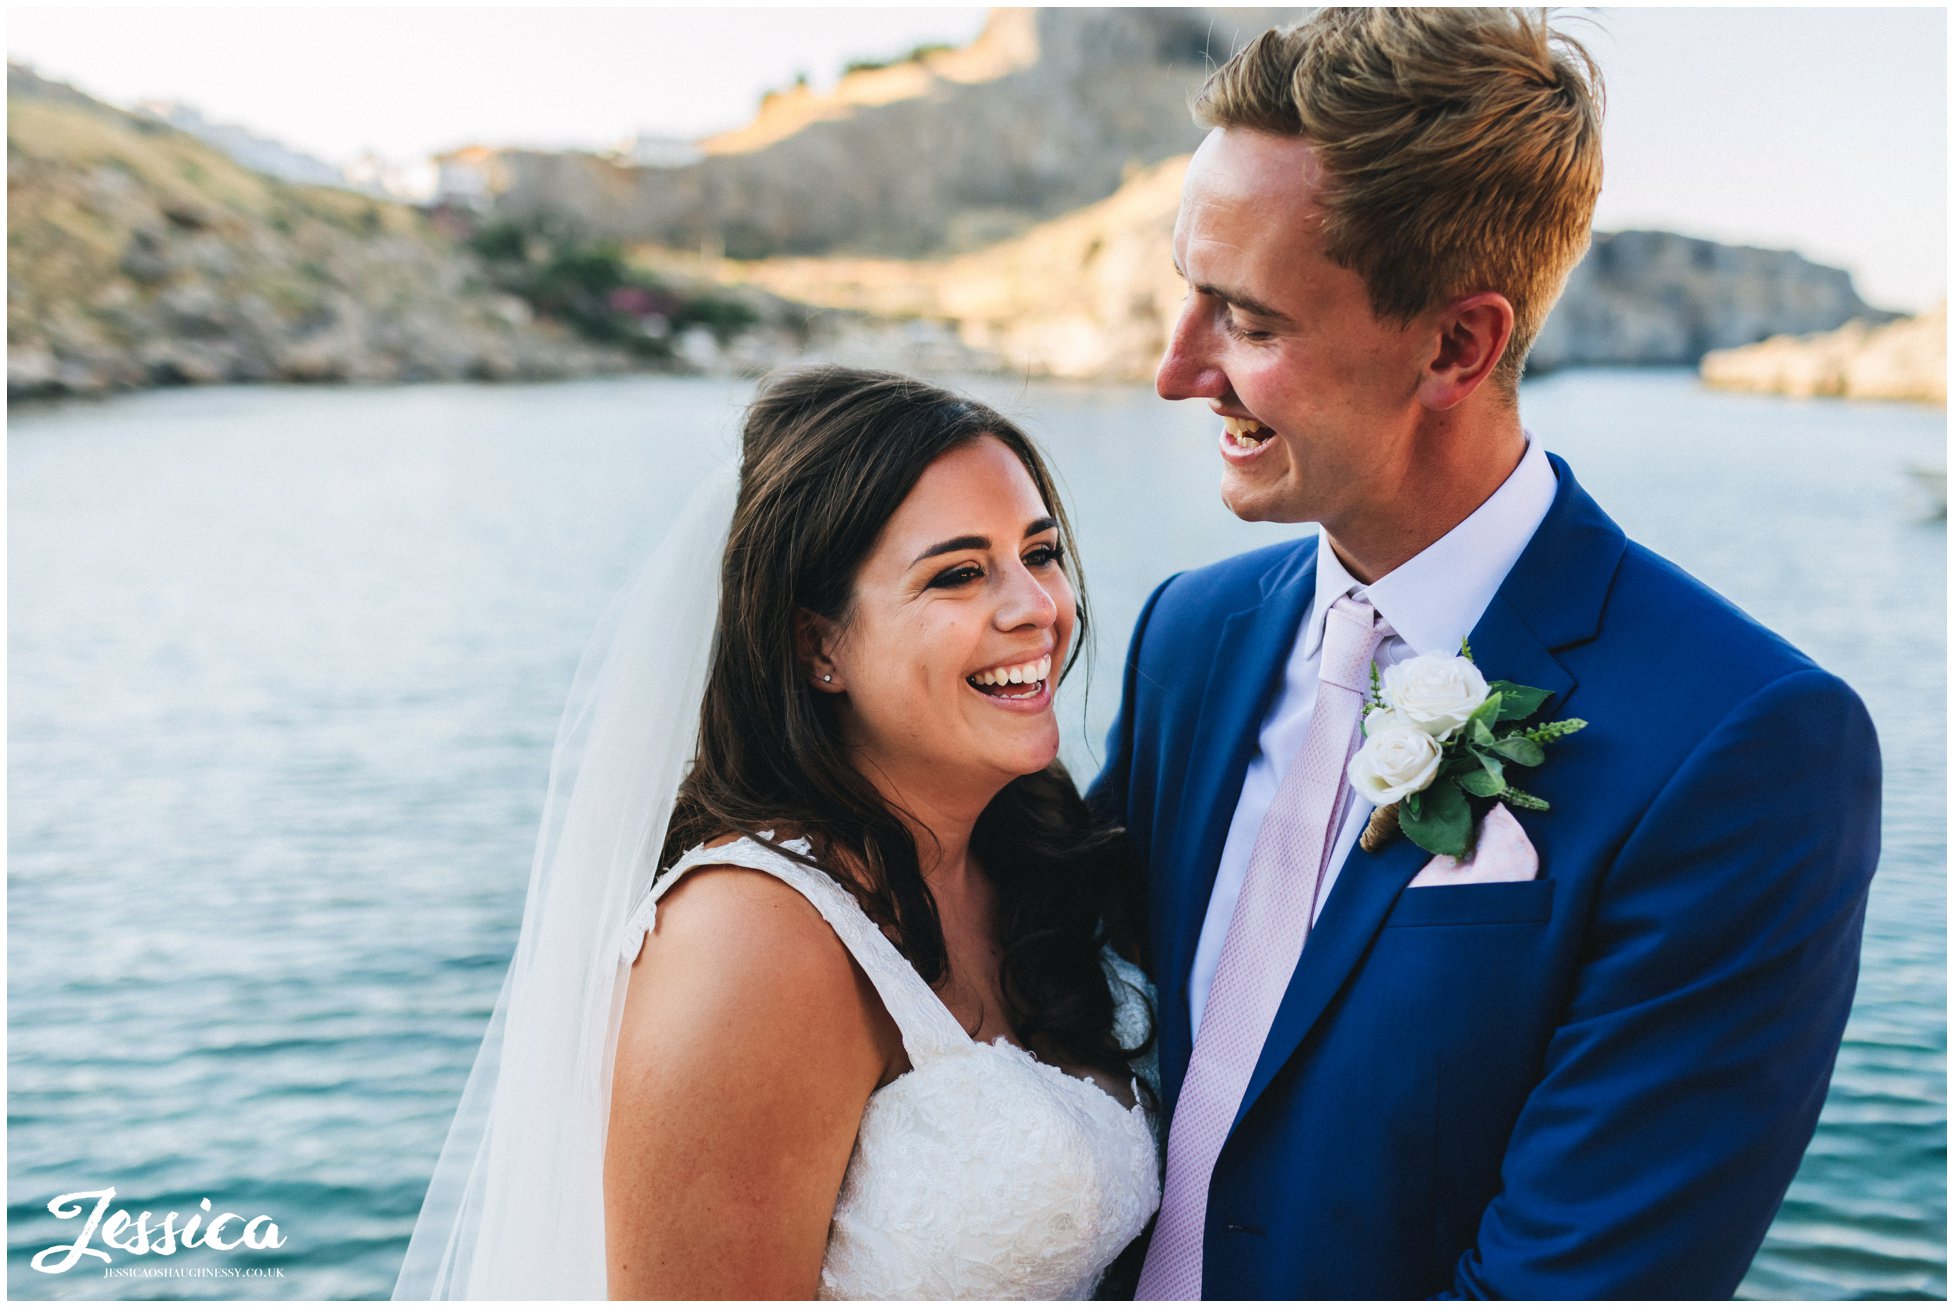 bride & groom laughing with the sea in the background on their destination wedding day in greece